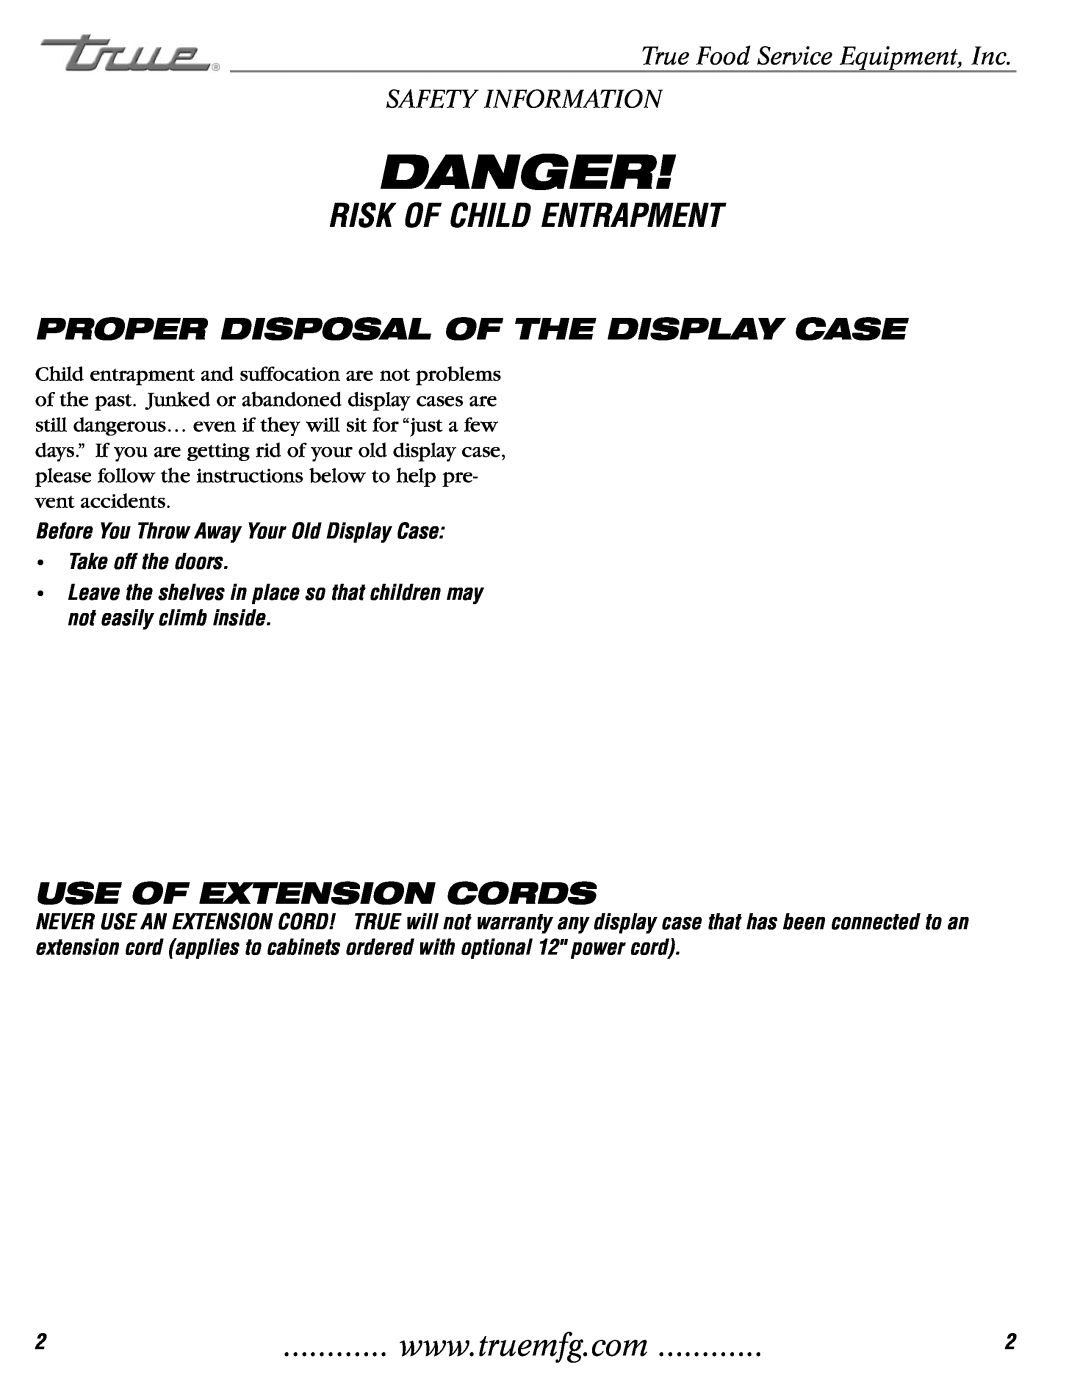 True Manufacturing Company TCGD-50 installation manual Proper Disposal Of The Display Case, Use Of Extension Cords, Danger 